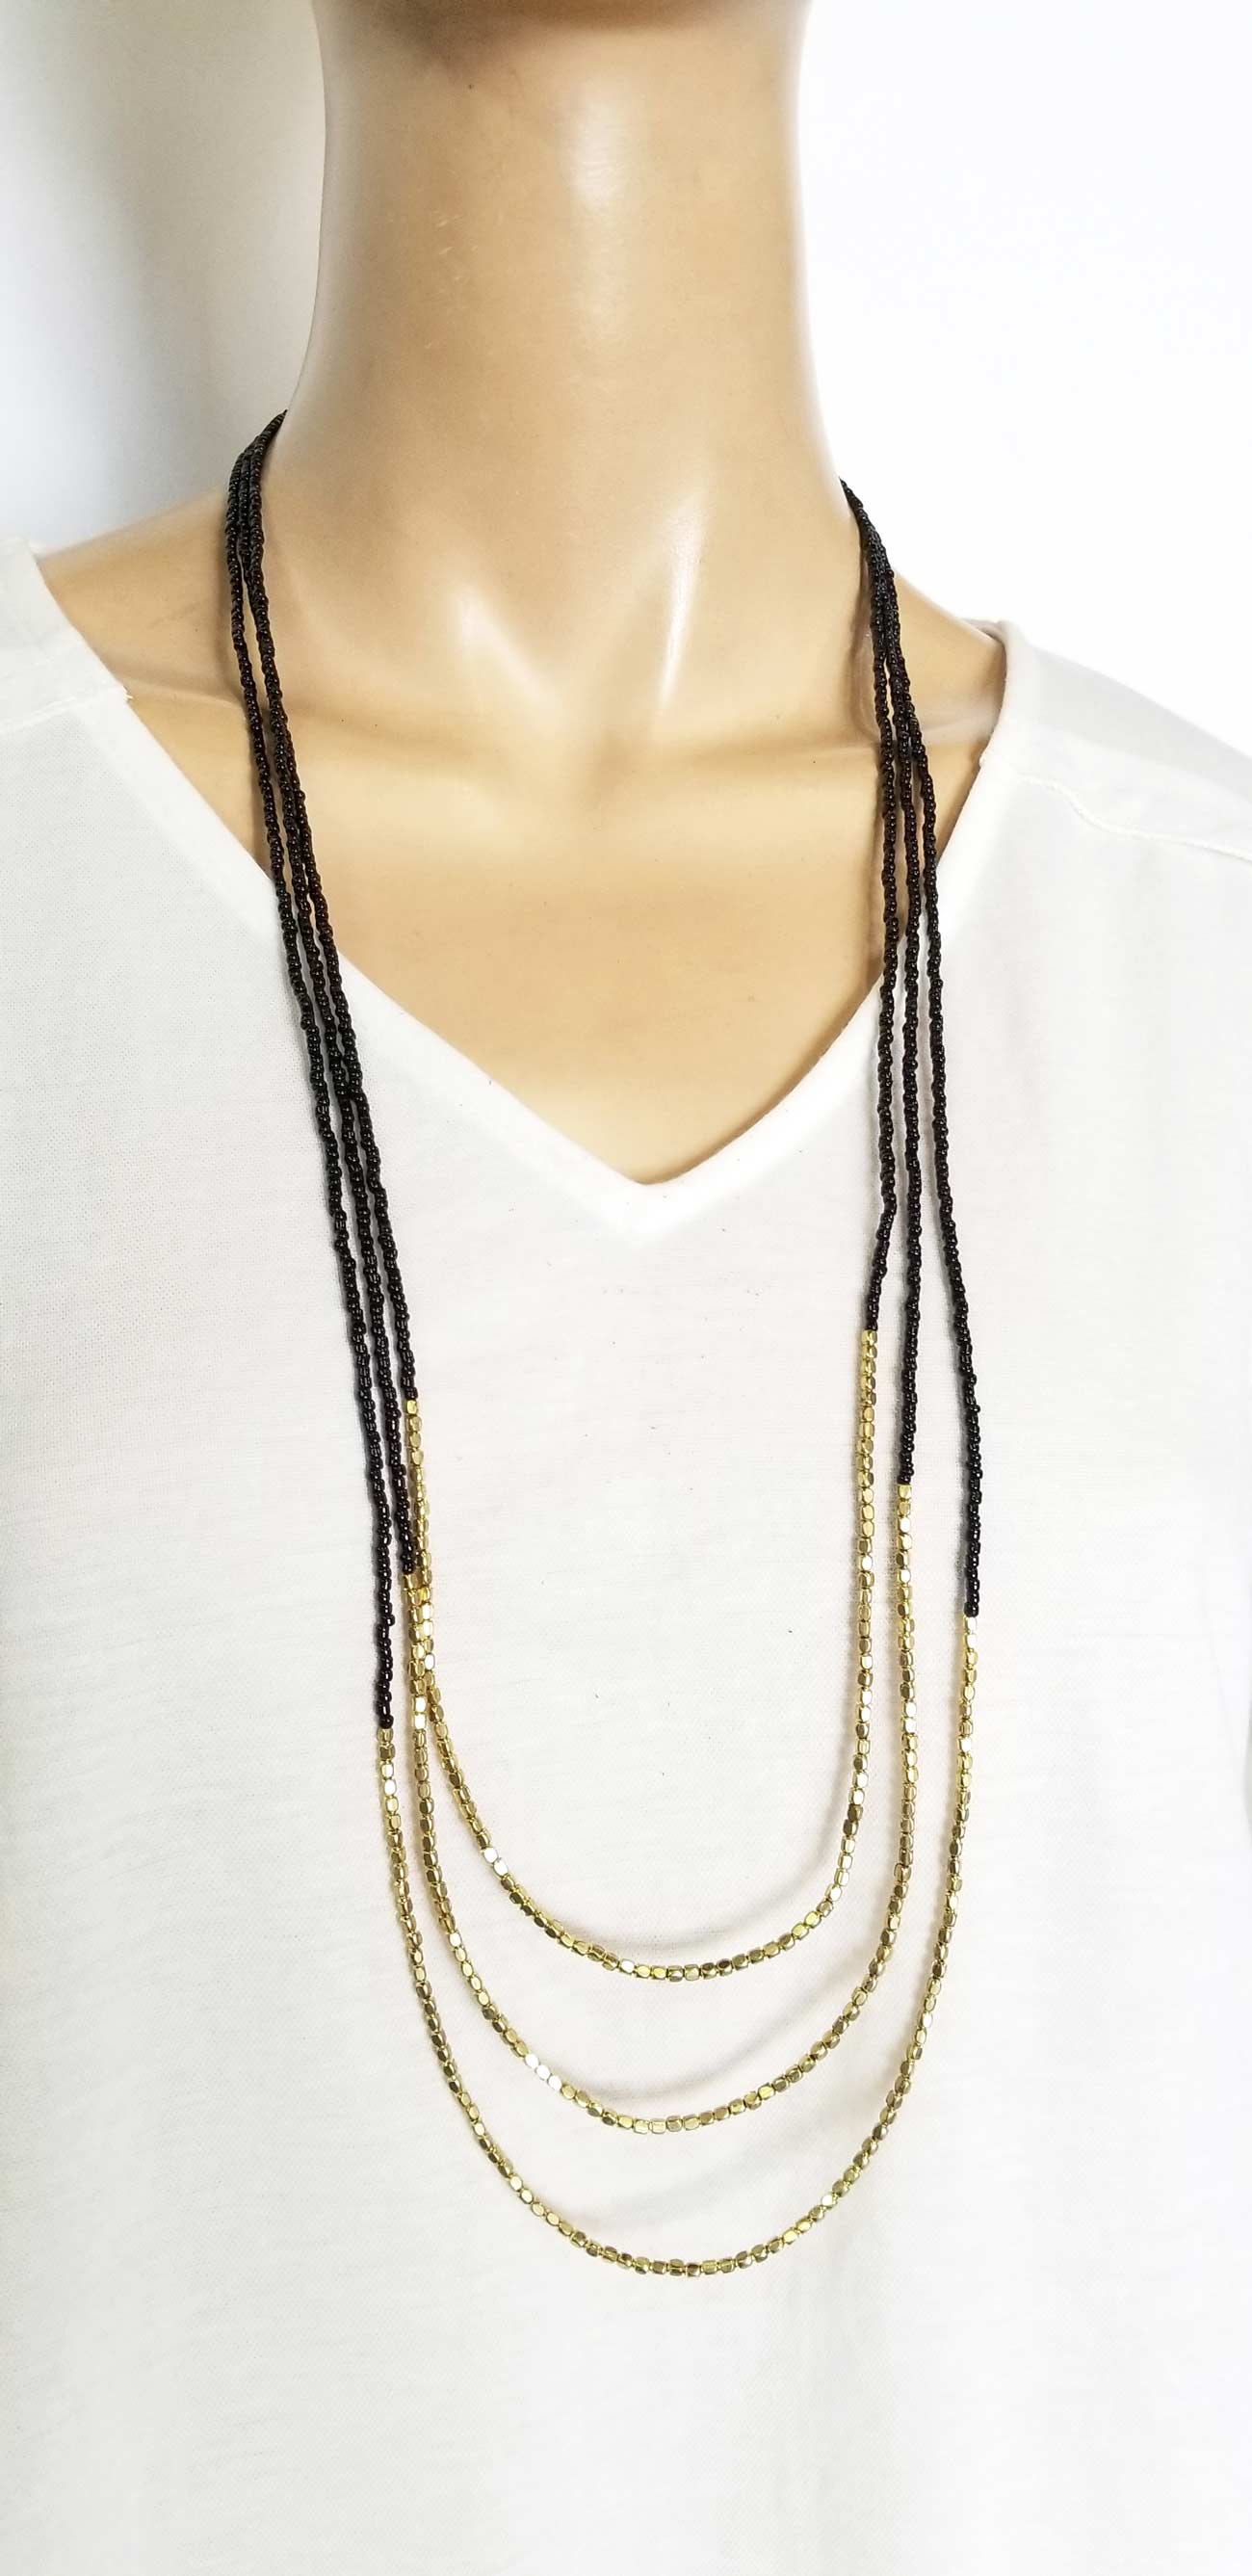 Accessories | Mala | Beaded Necklace Three Layers